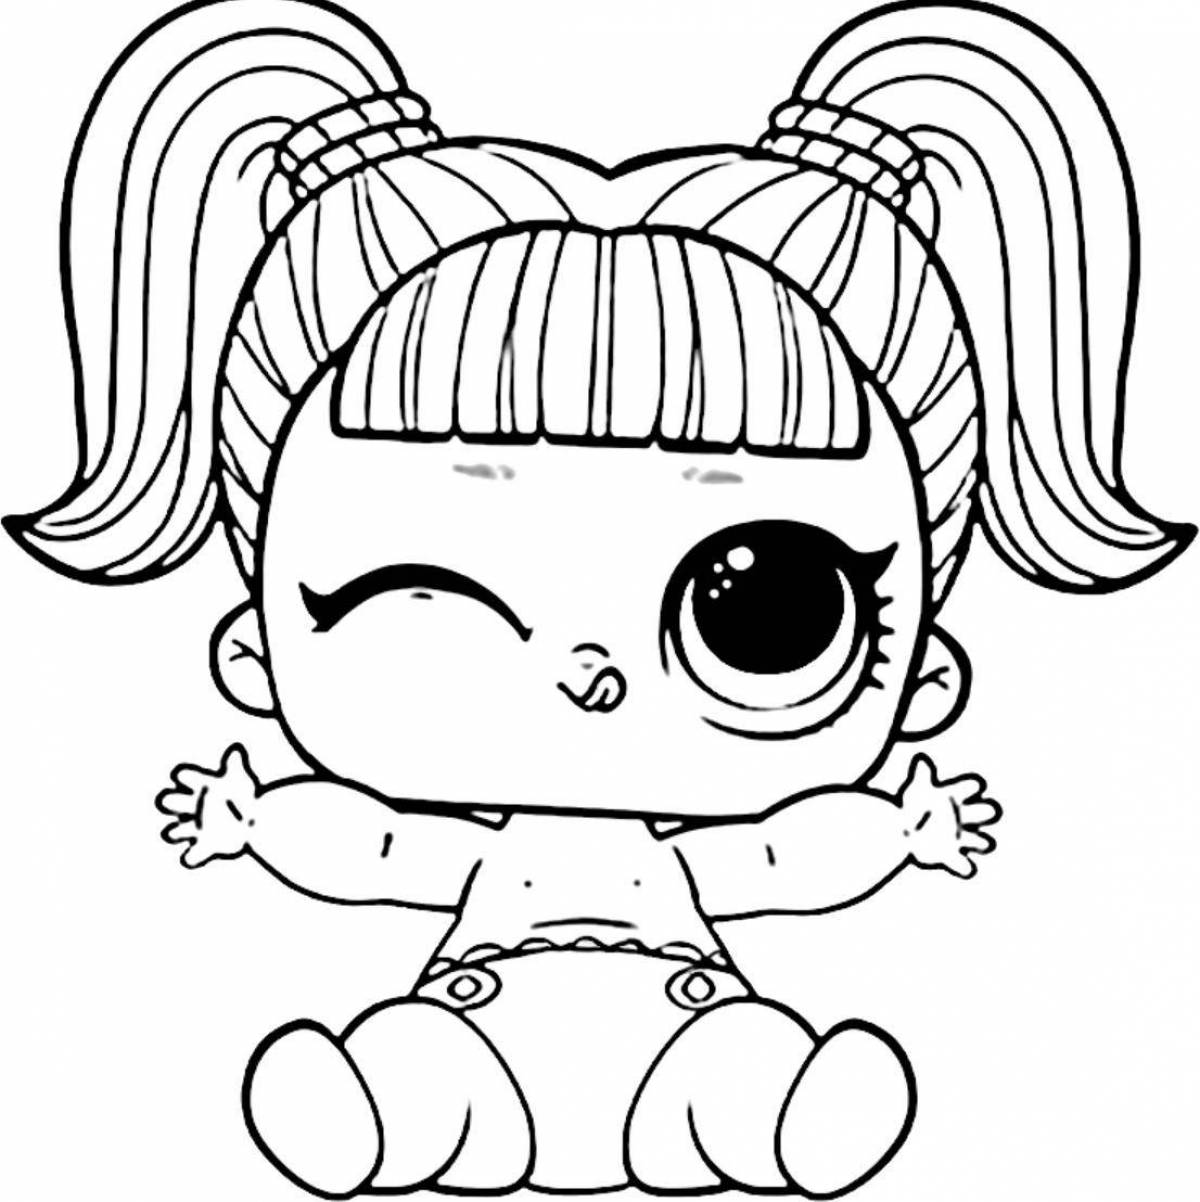 Awesome lol doll coloring book for kids